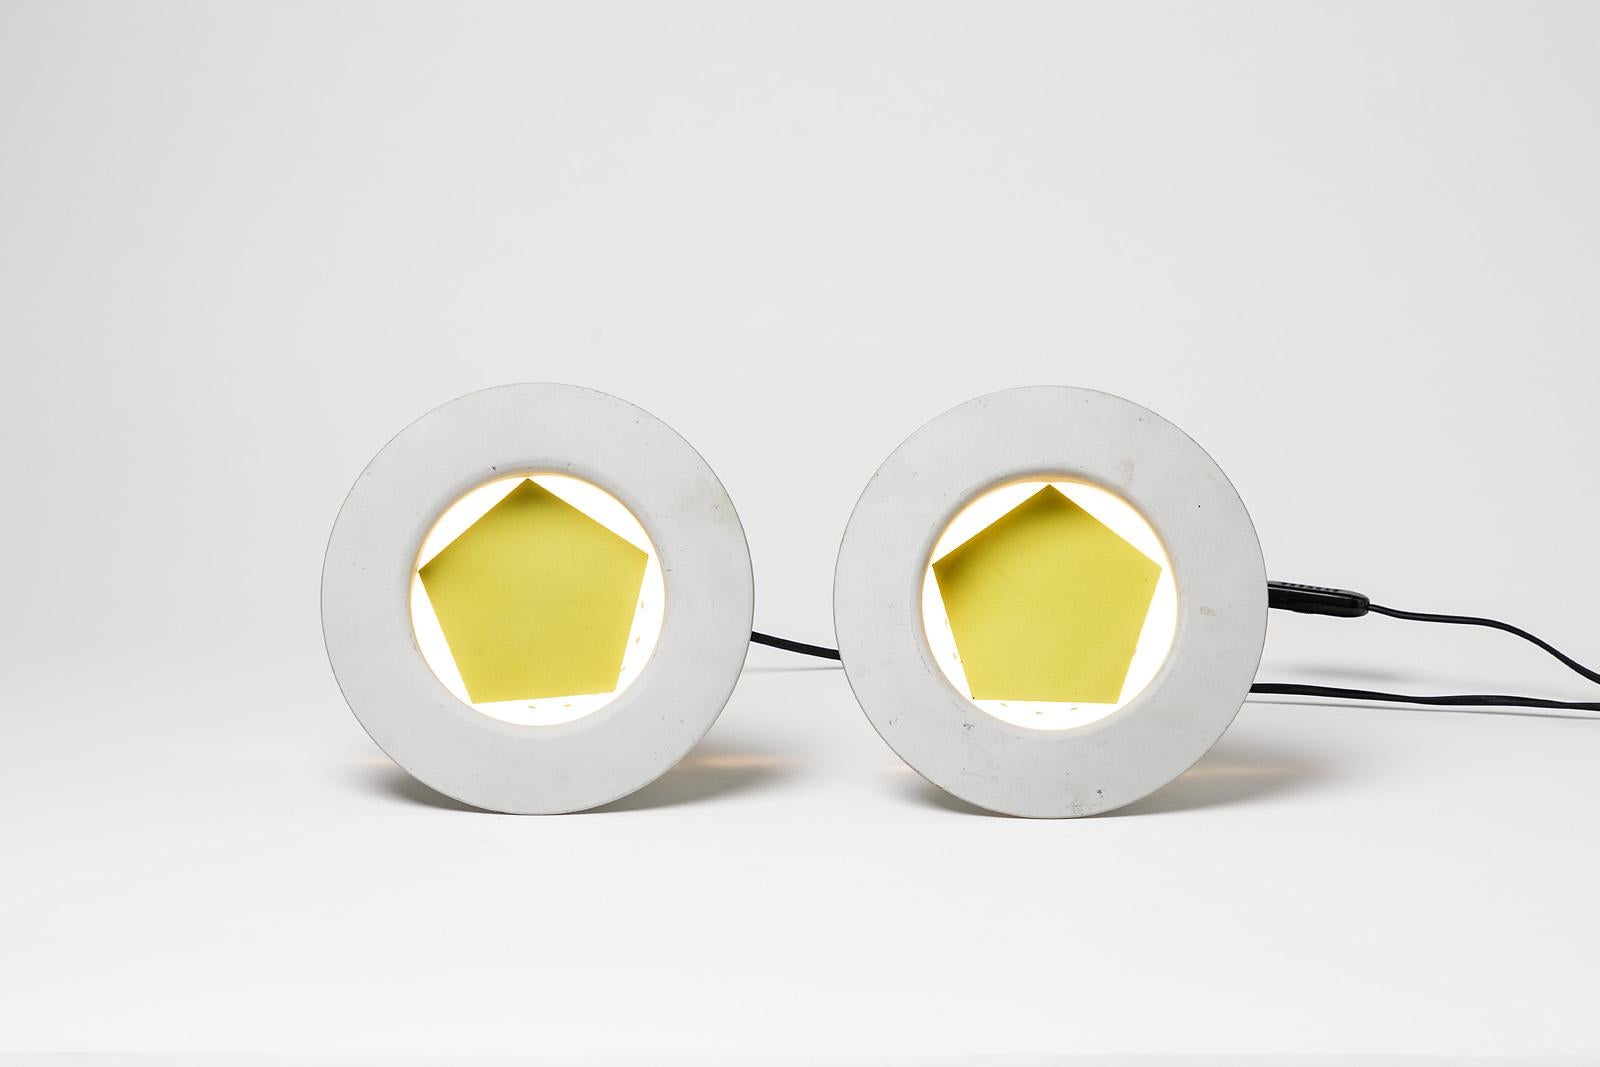 Contemporary Modern Design Pair of Table Lamp by Vincent Beaurin Artist 1993 Grey and Yellow